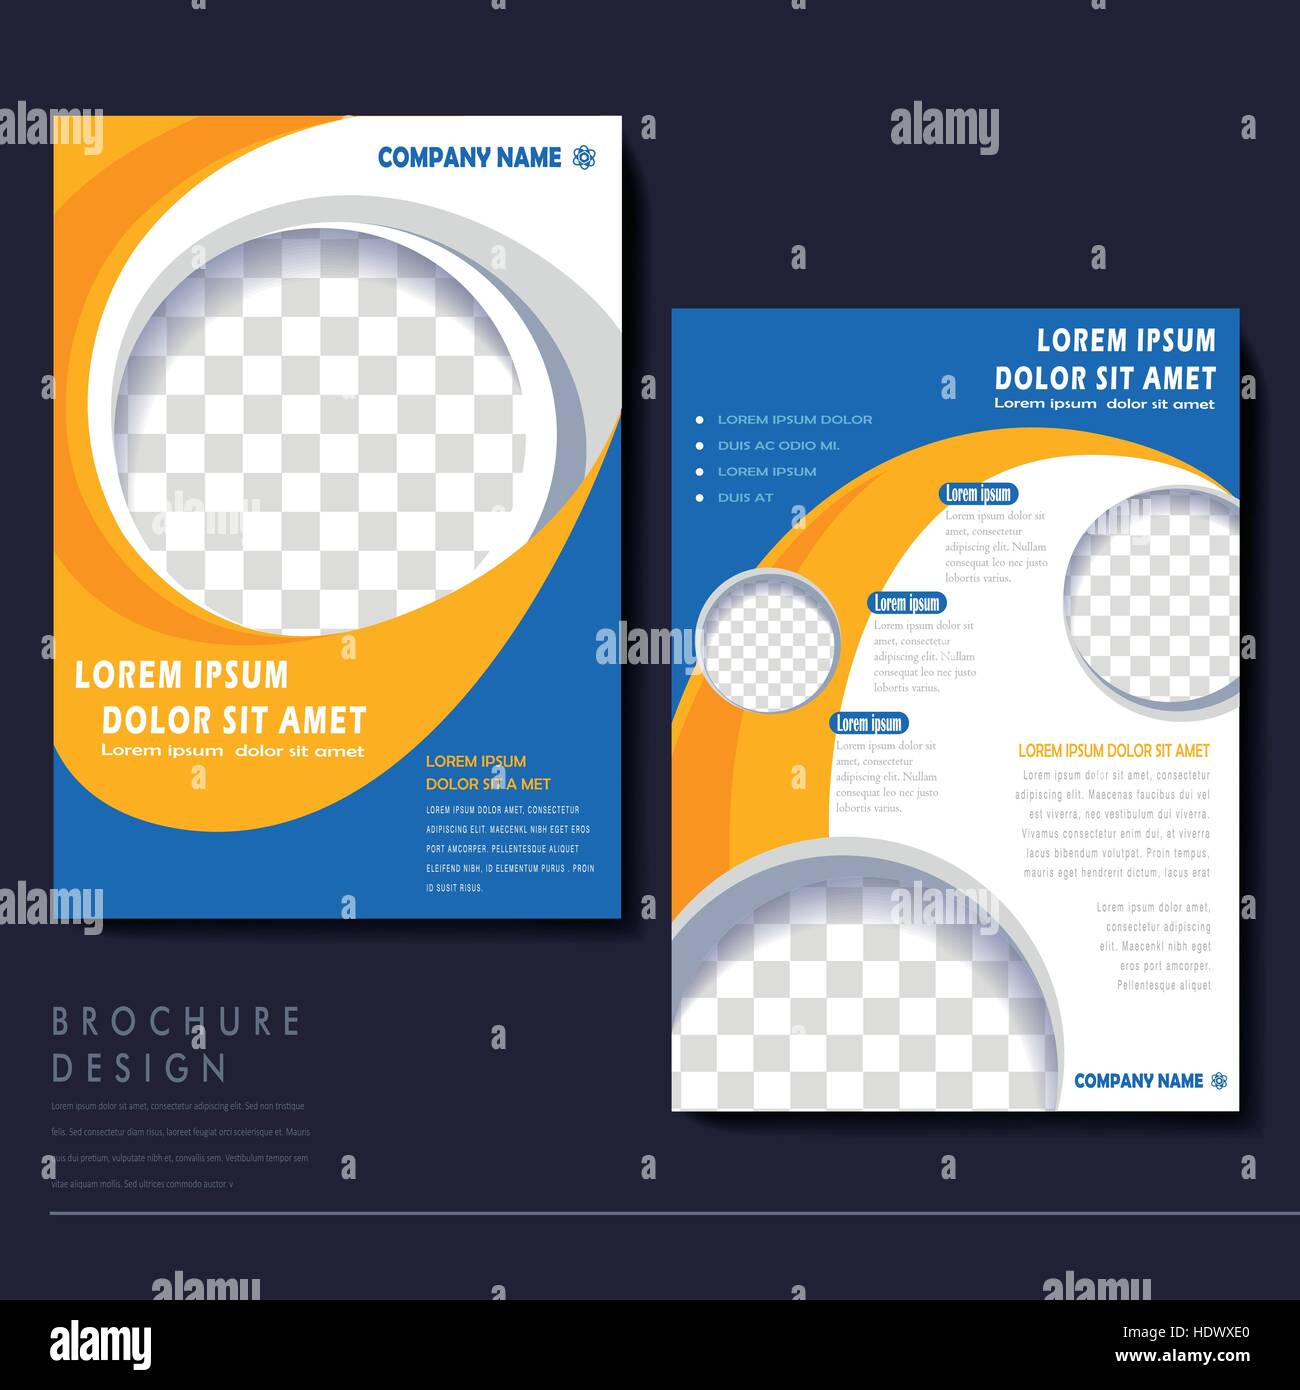 Modern Flyer Template For Business Concept In Blue And Orange Stock Vector Image Art Alamy